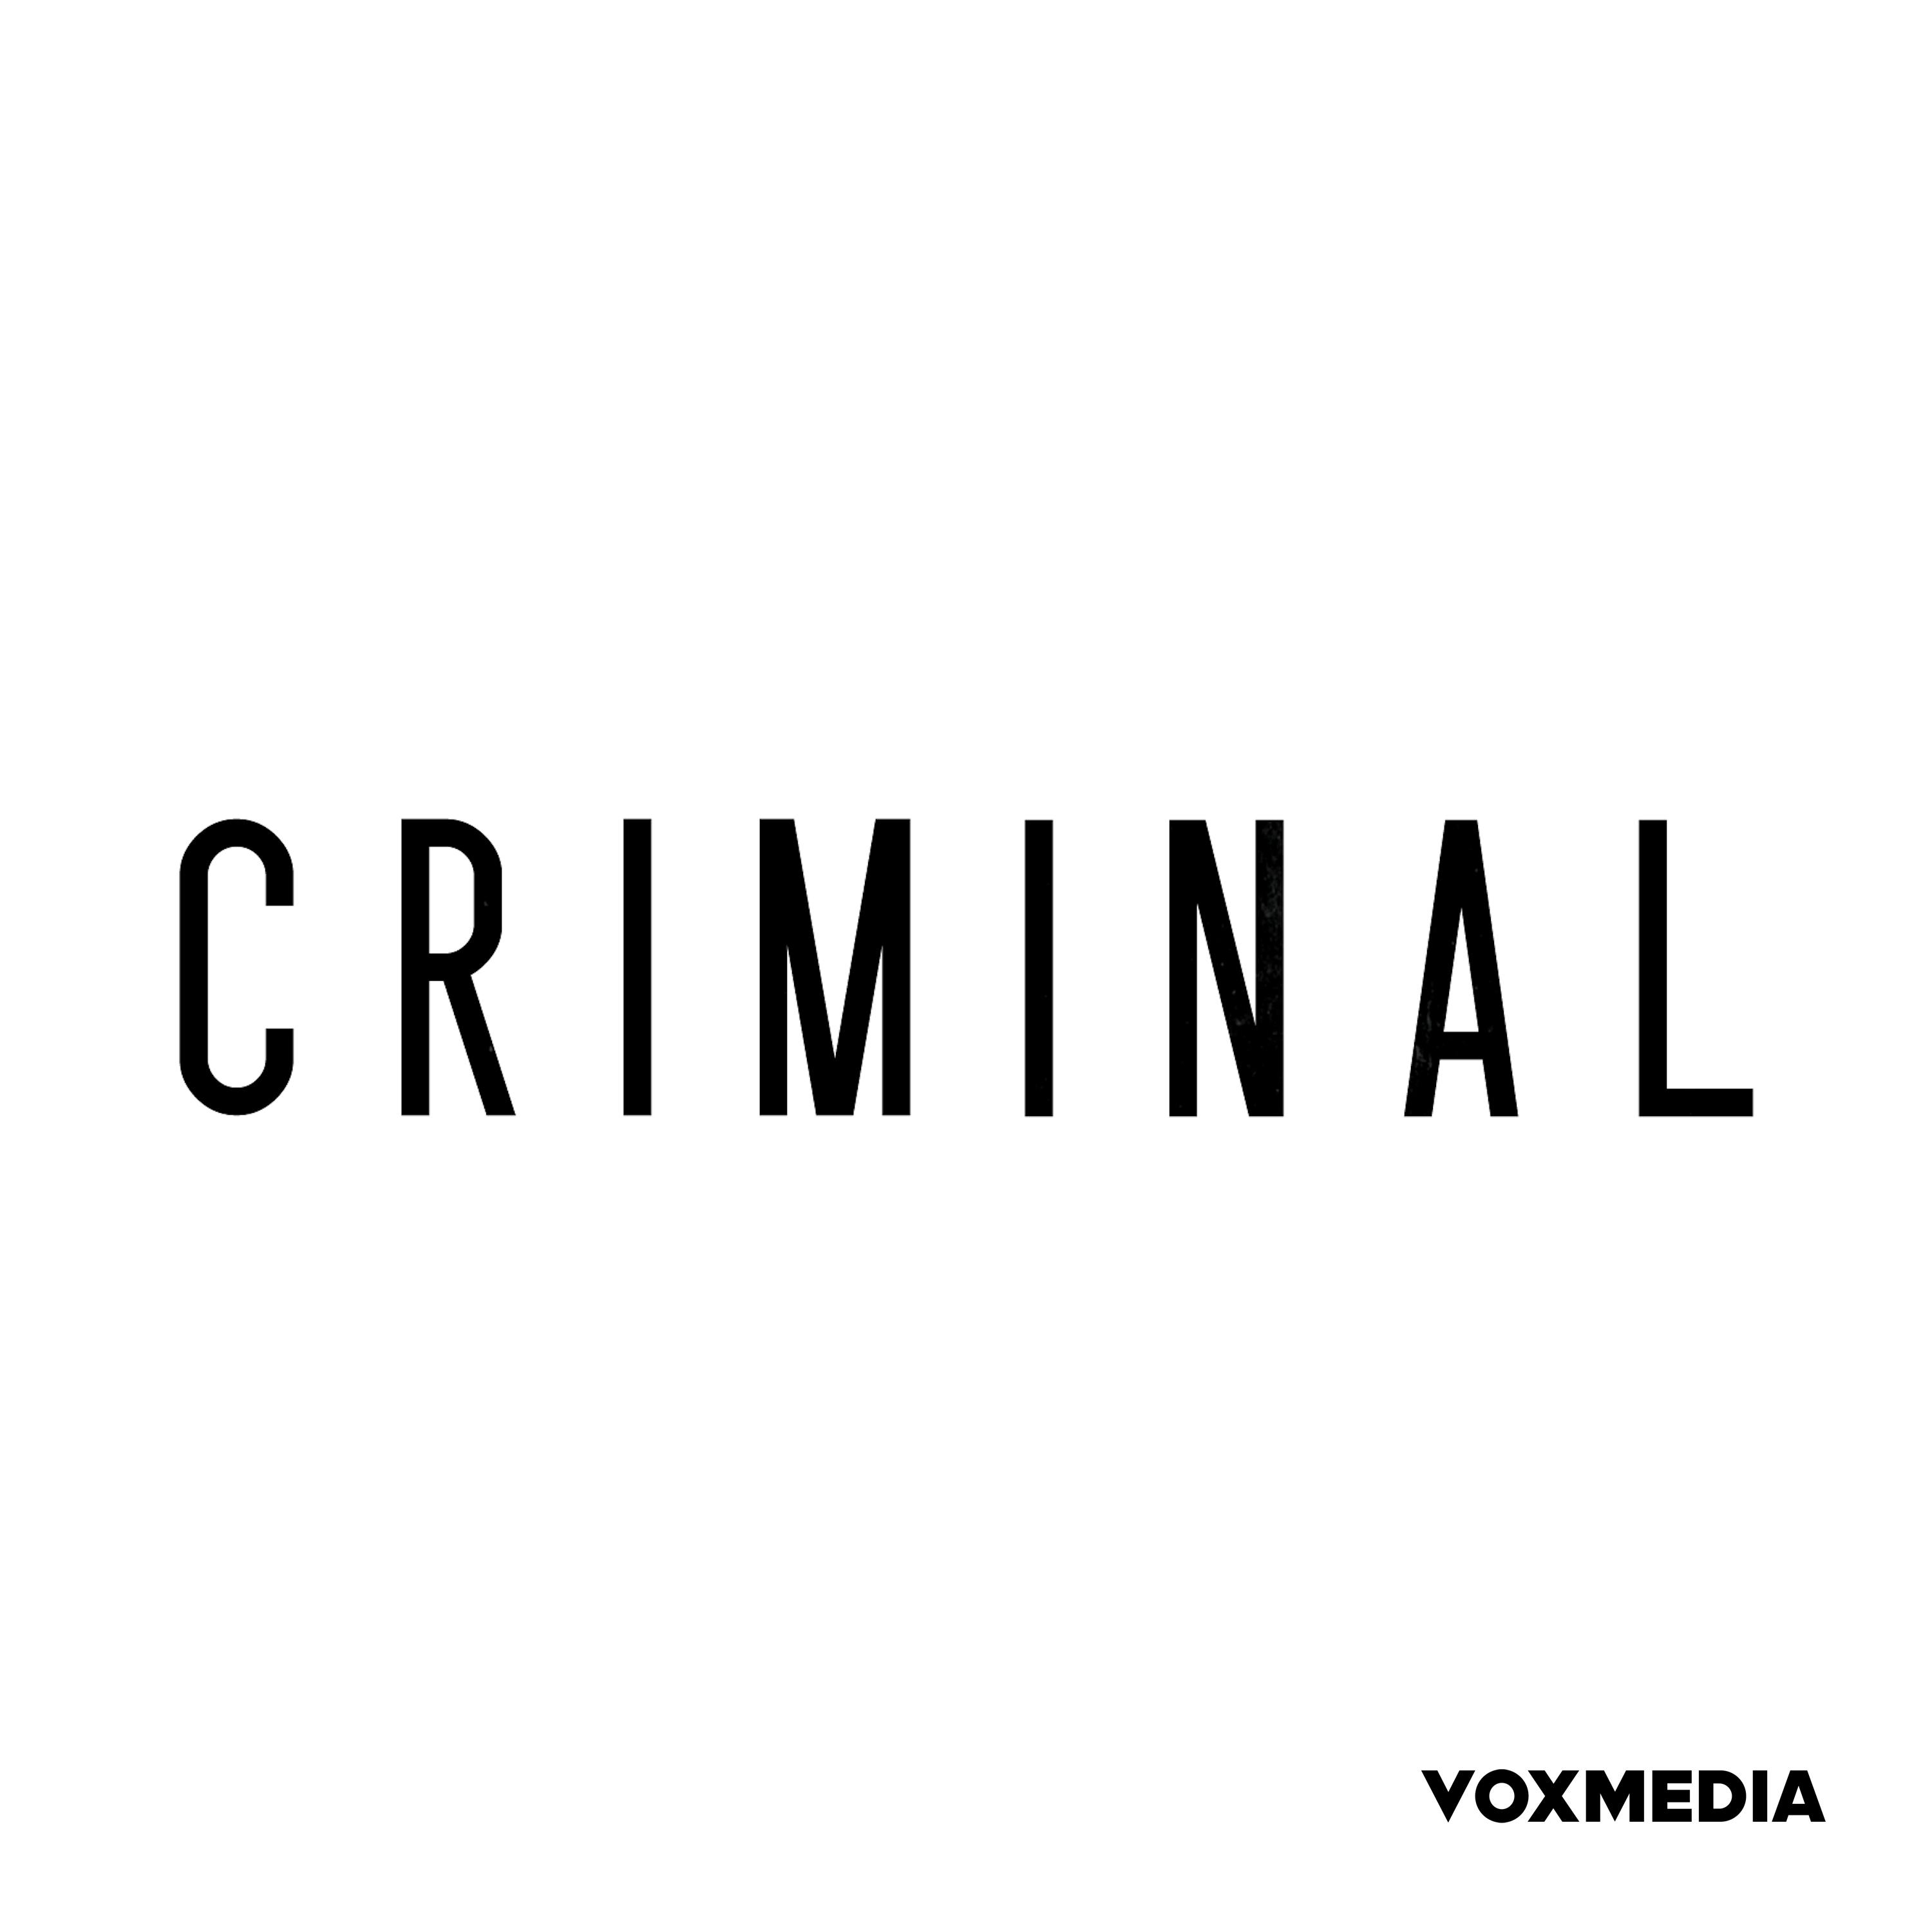 A New Show from the Makers of Criminal: Episode 1